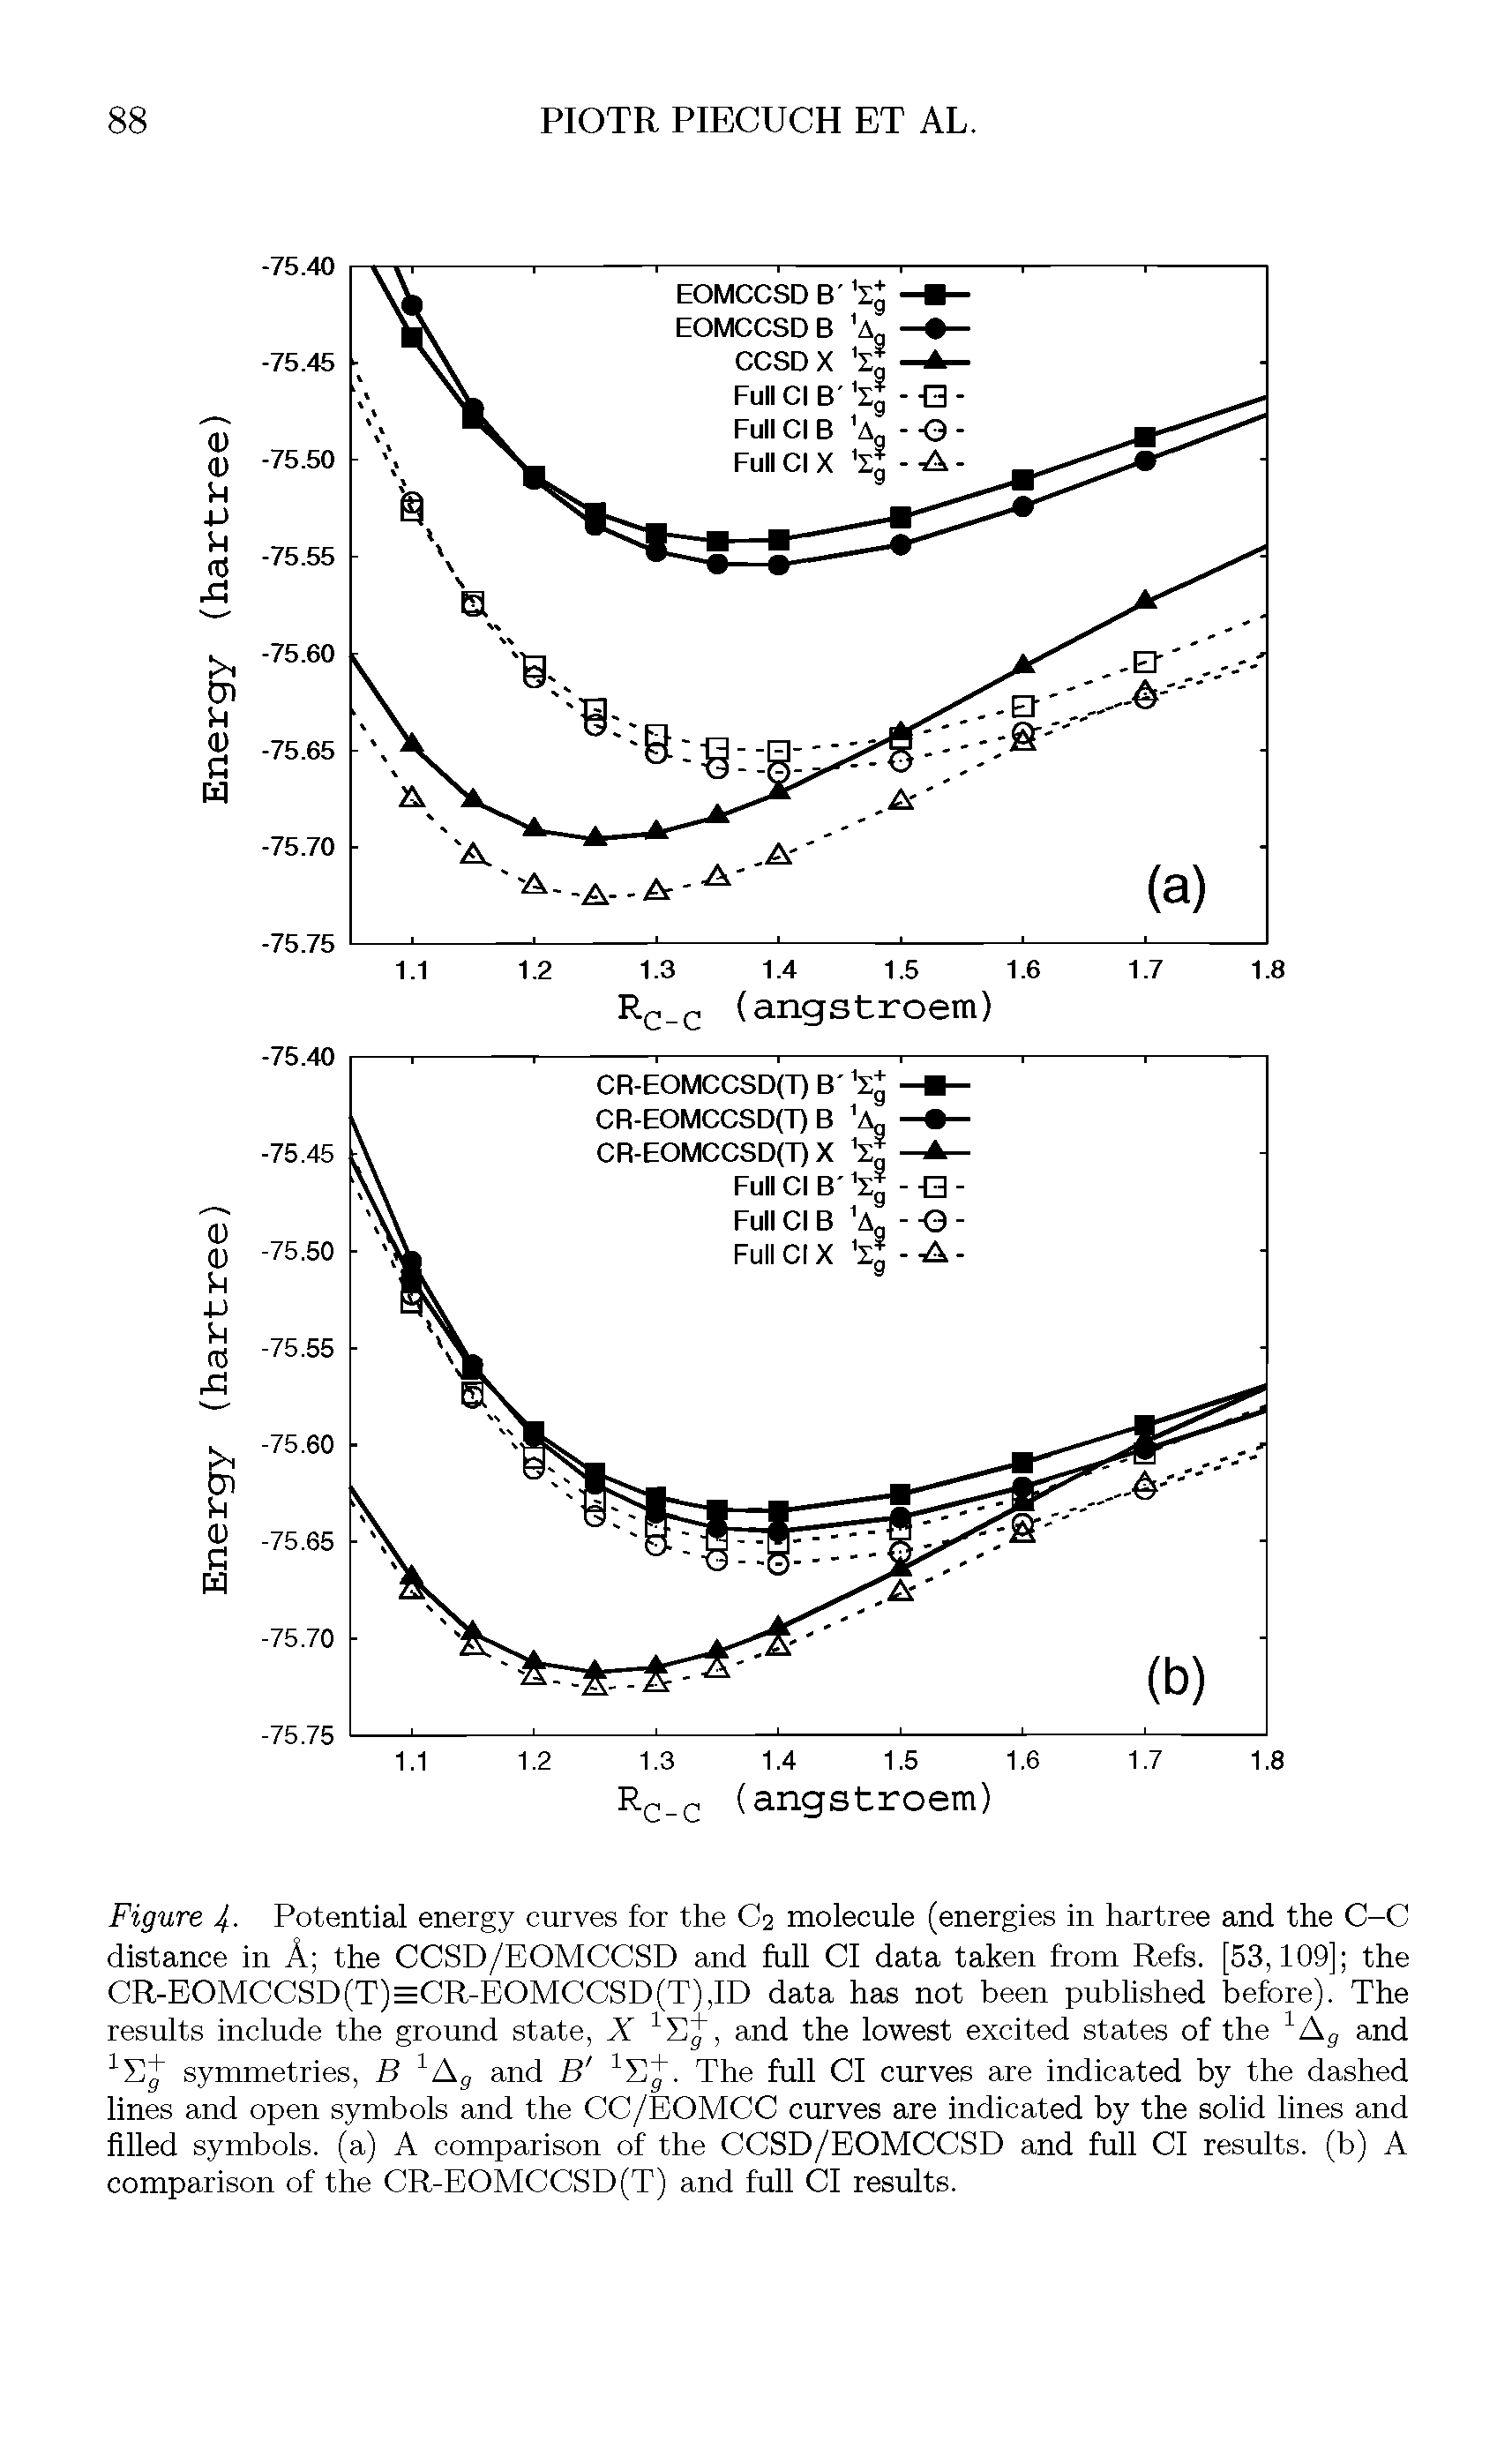 Figure 4- Potential energy curves for the C2 molecule (energies in hartree and the C-C distance in A the CCSD/EOMCCSD and full Cl data taken from Refs. [53,109] the CR-EOMCCSD(T)=CR-EOMCCSD(T),ID data has not been published before). The results include the ground state, X and the lowest excited states of the Ag and...